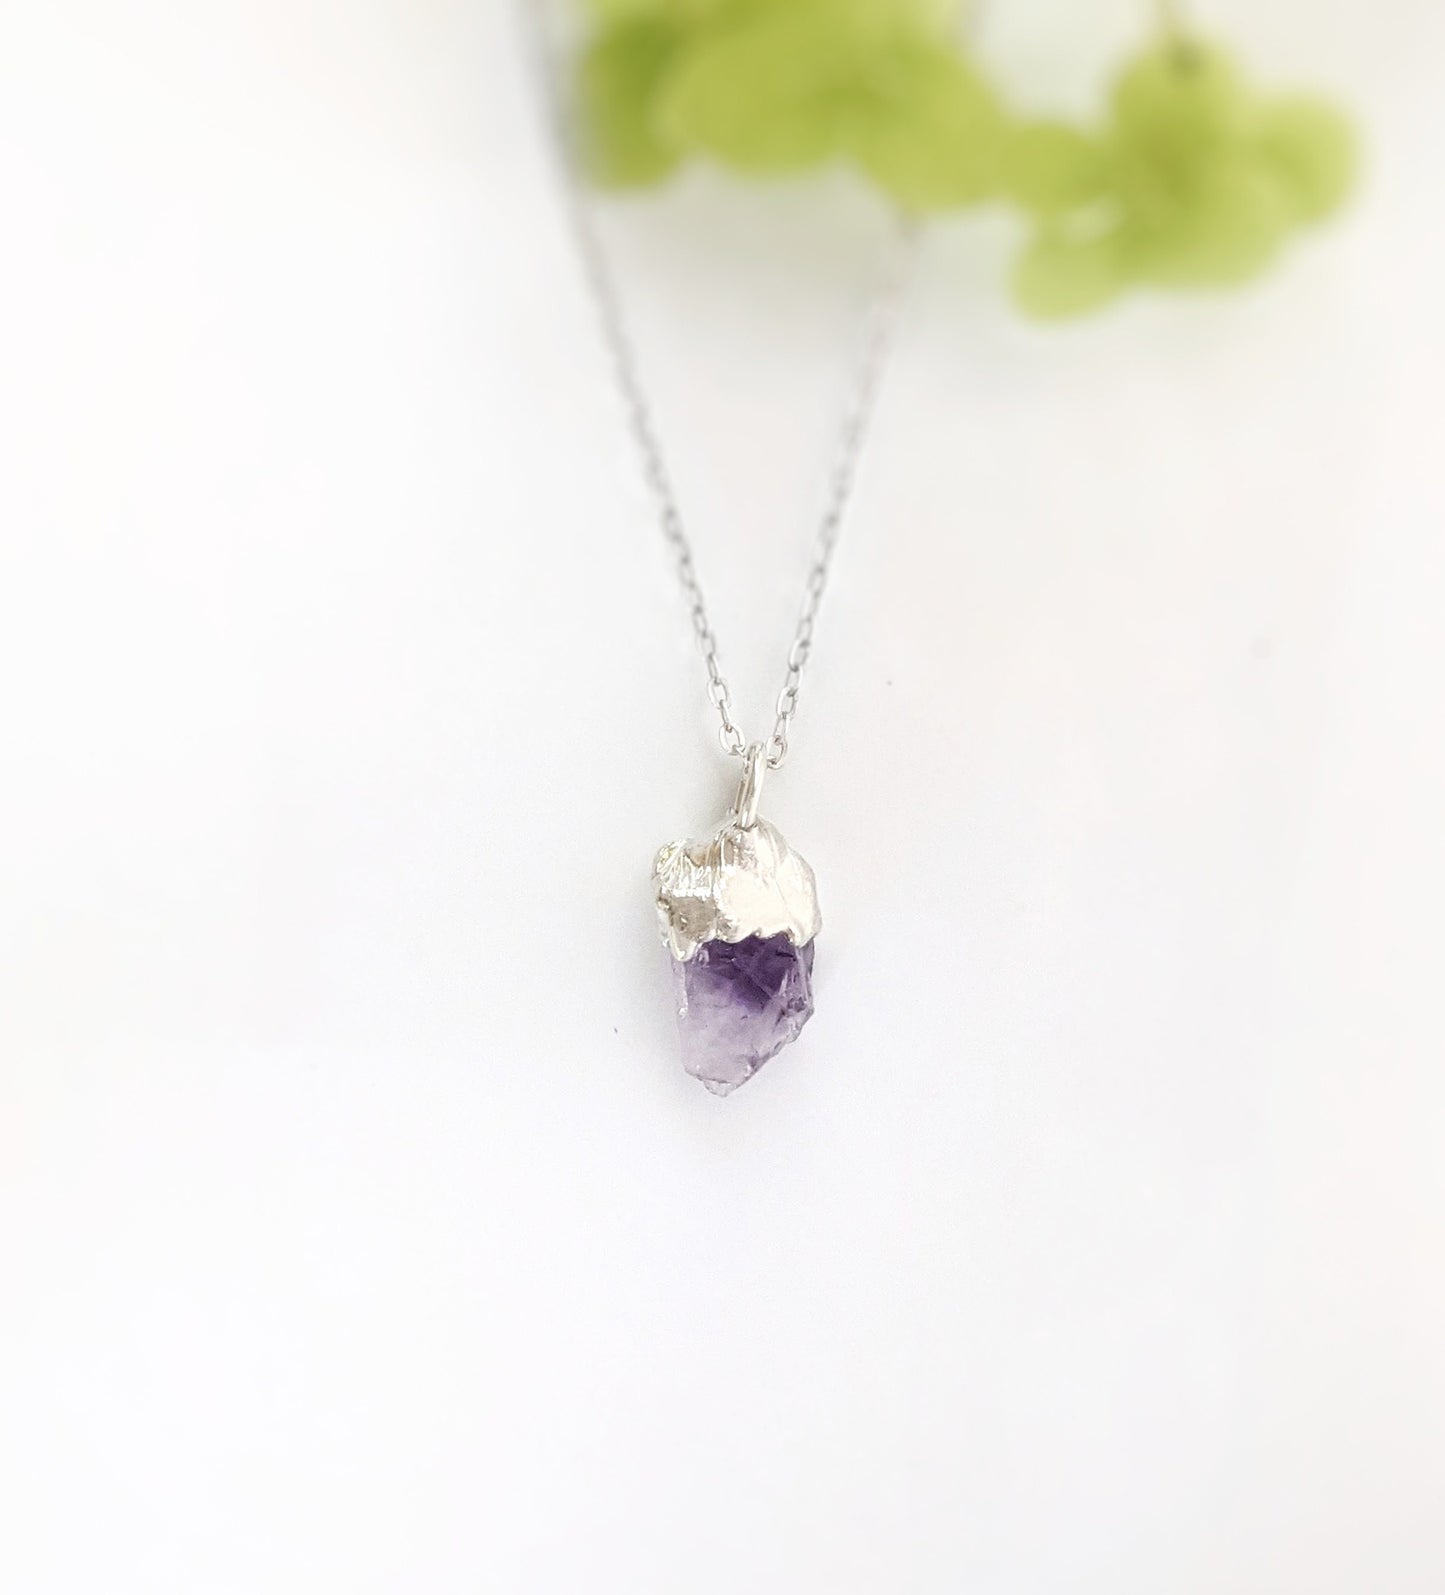 Raw Amethyst Necklace uniquely set in Sterling Silver